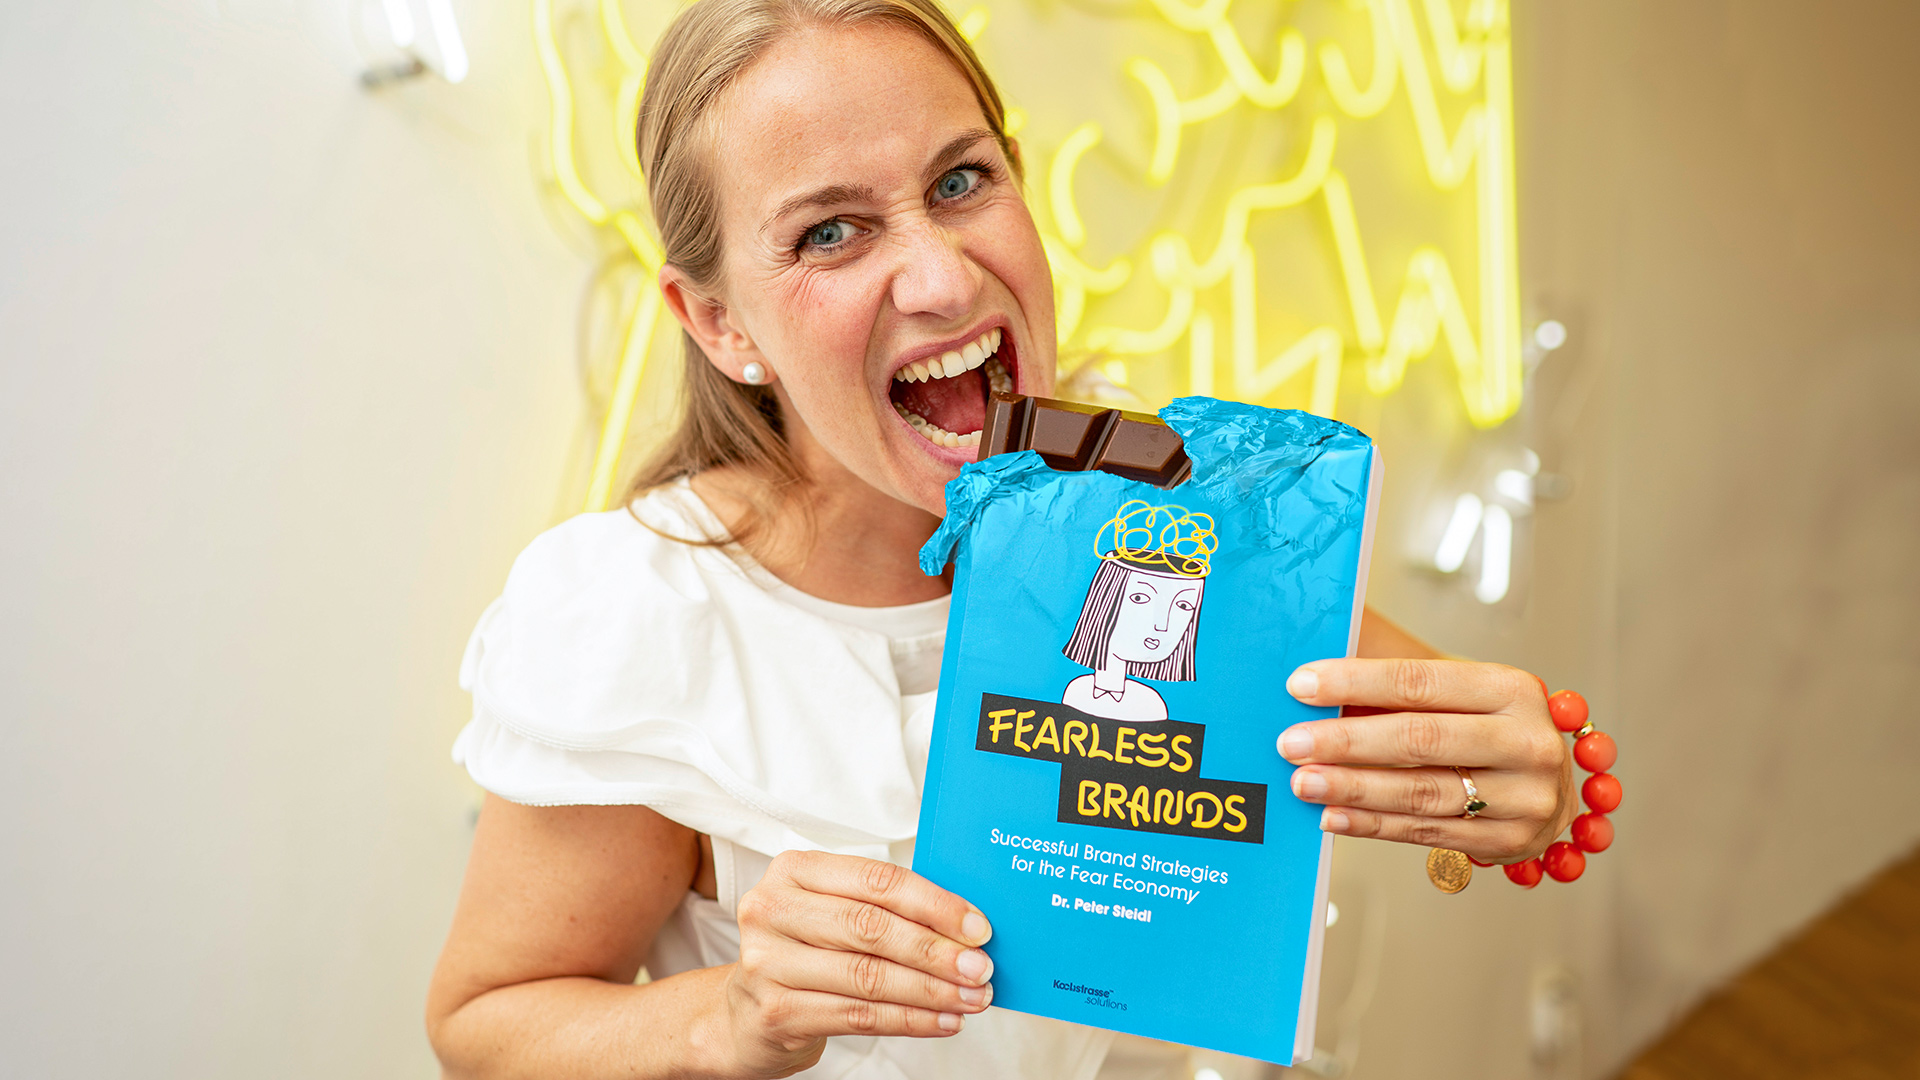 Fearless Brands – Successful Brand Strategies for the Fear Economy | Enter Tomorrow! with Kochstrasse™ Dr. Peter Steidl (English Version available on Amazon)